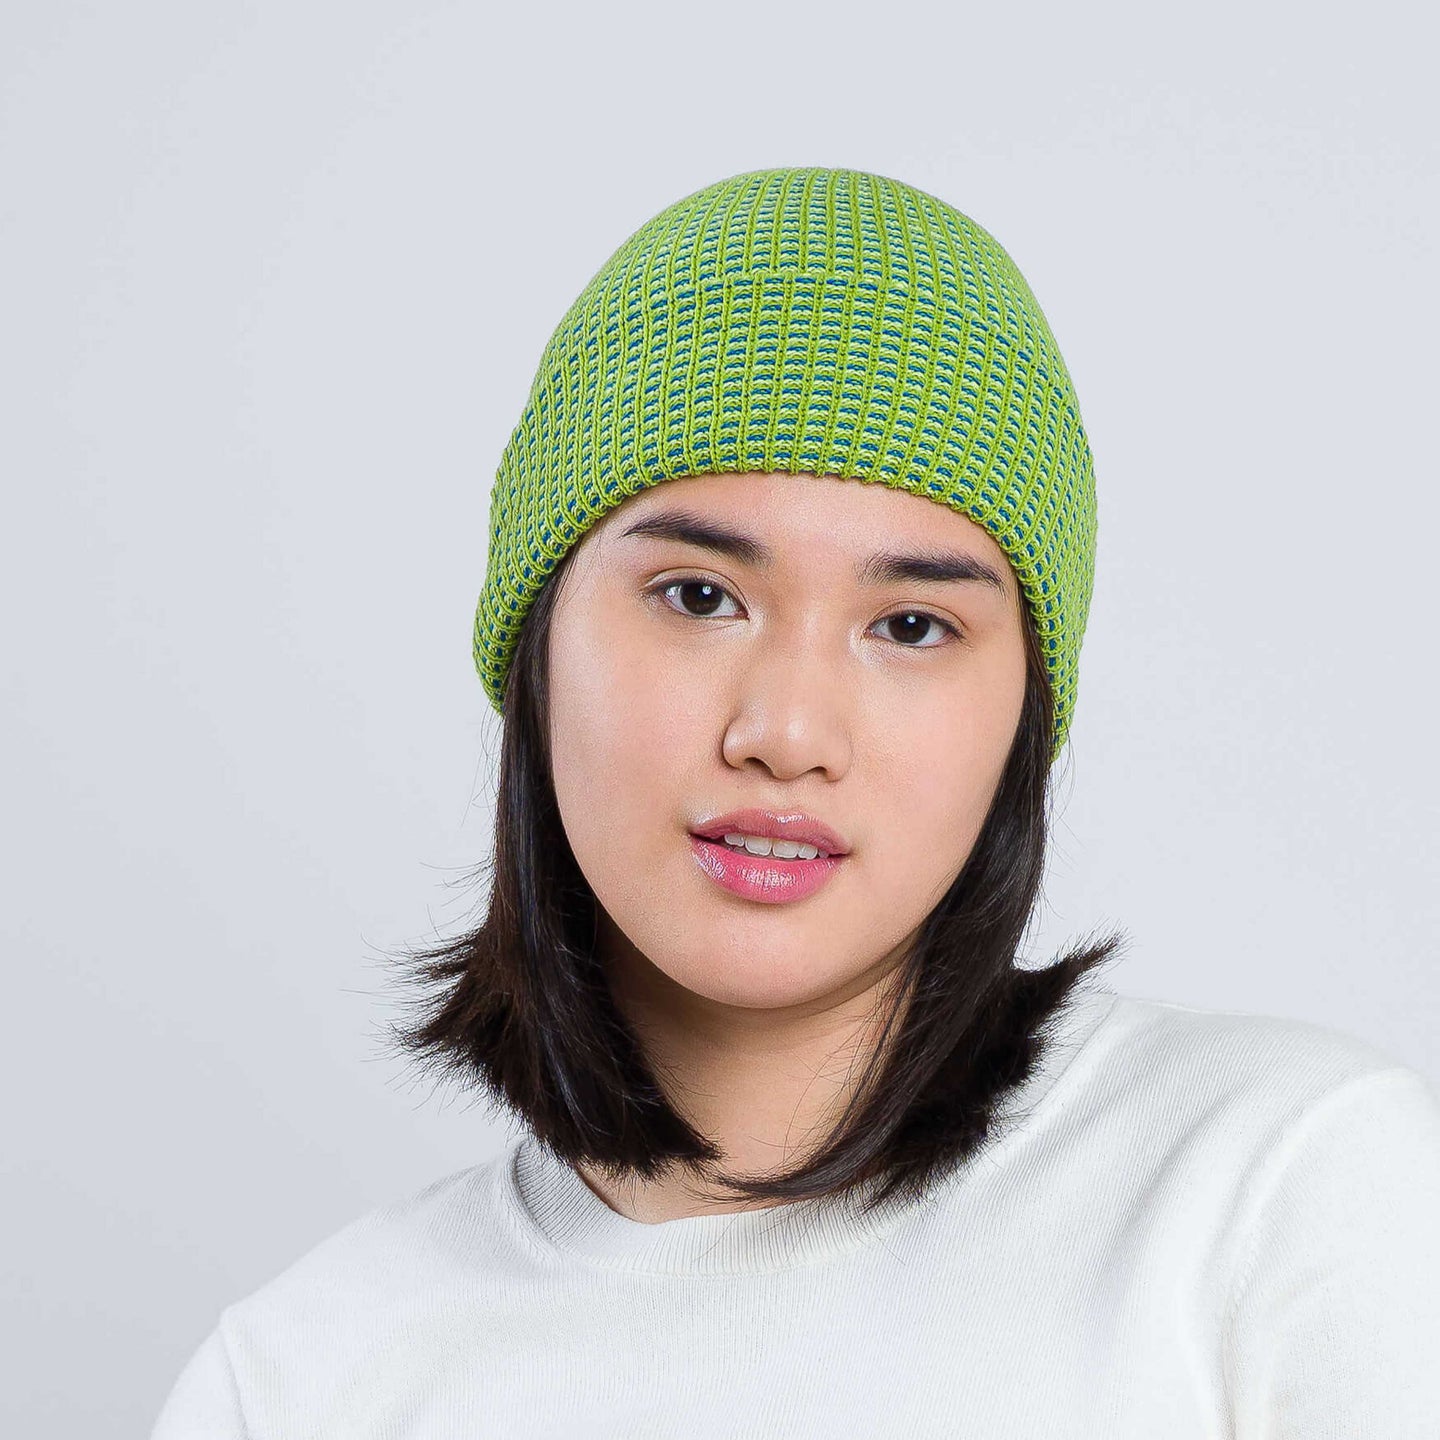 Grid Simple Rib Hat knitted hat green On Model Wear How to